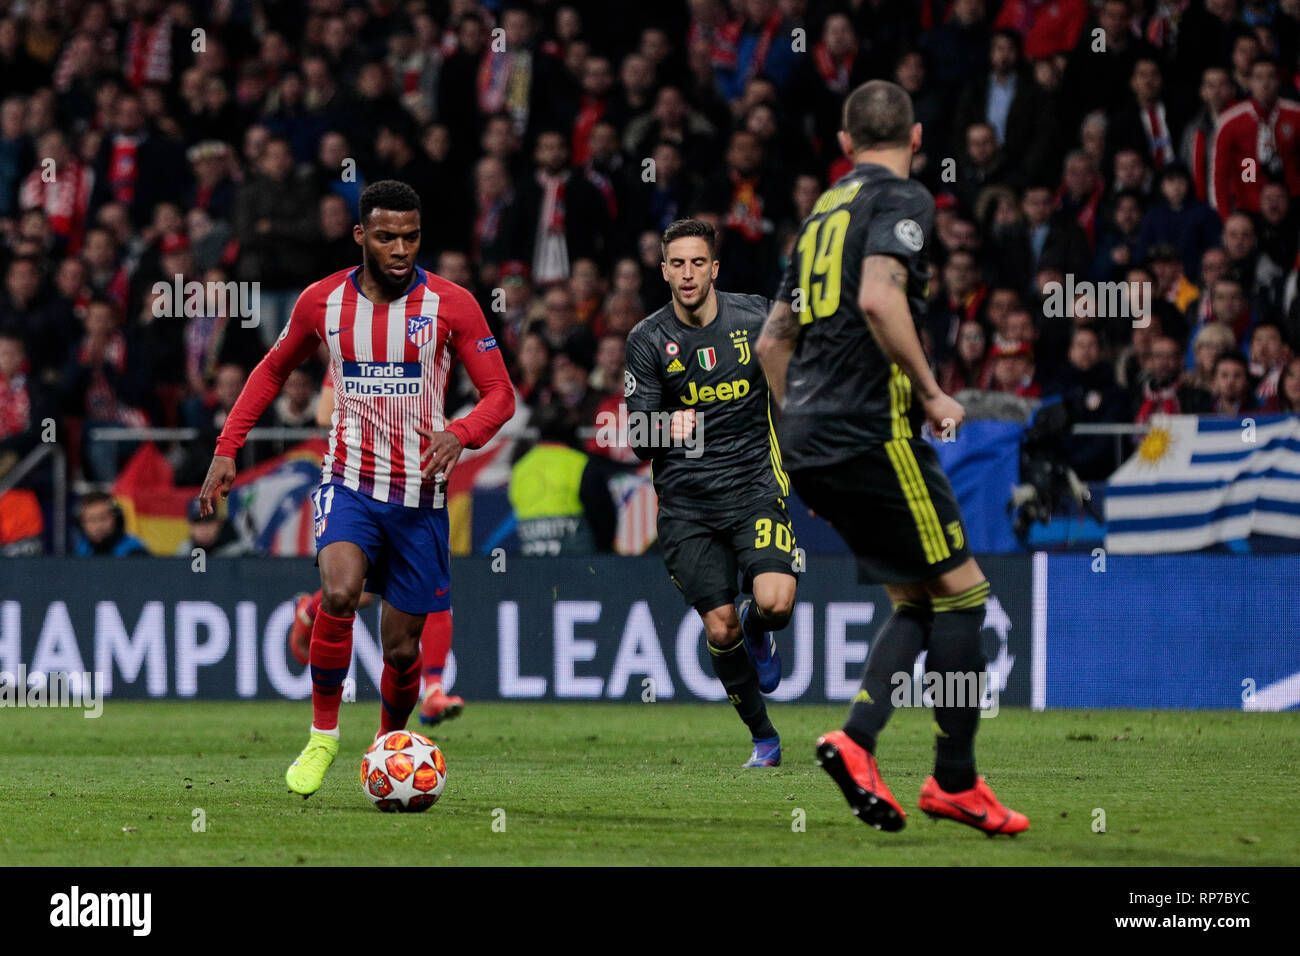 Atletico de Madrid's Thomas Lemar and Juventus' Rodrigo Betancur seen in action during the UEFA Champions League match, Round of 16, 1st leg between Atletico de Madrid and Juventus at Wanda Metropolitano Stadium in Madrid, Spain. Stock Photo